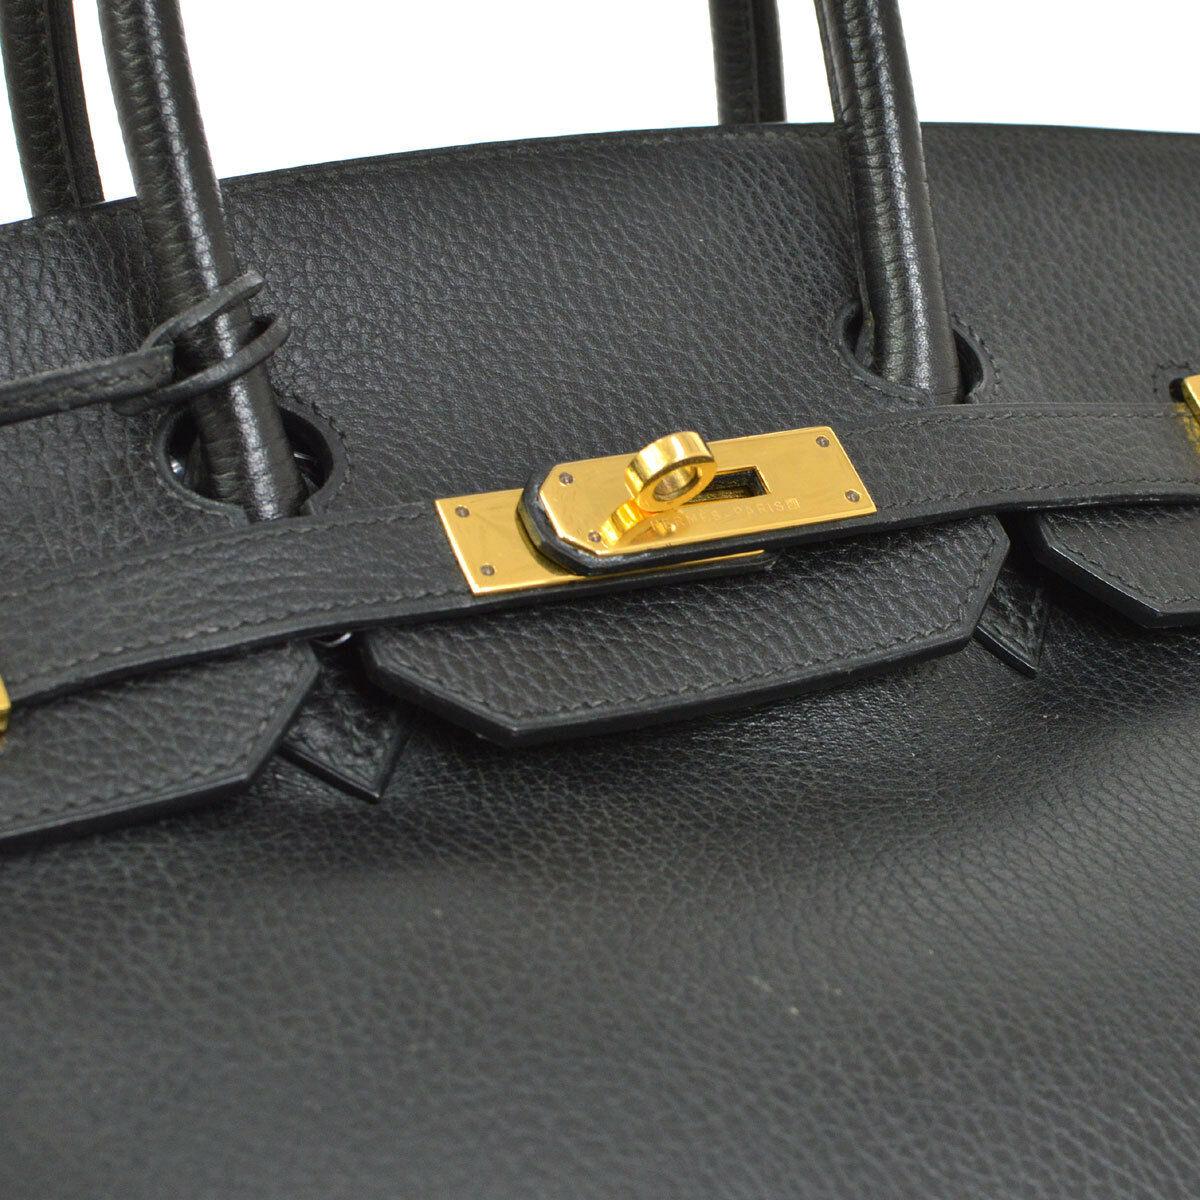 Hermes Birkin 35 Black Leather Gold Top Handle Satchel Travel Tote Bag

Leather
Gold tone hardware
Leather lining
Date code present
Made in France
Handle drop 4